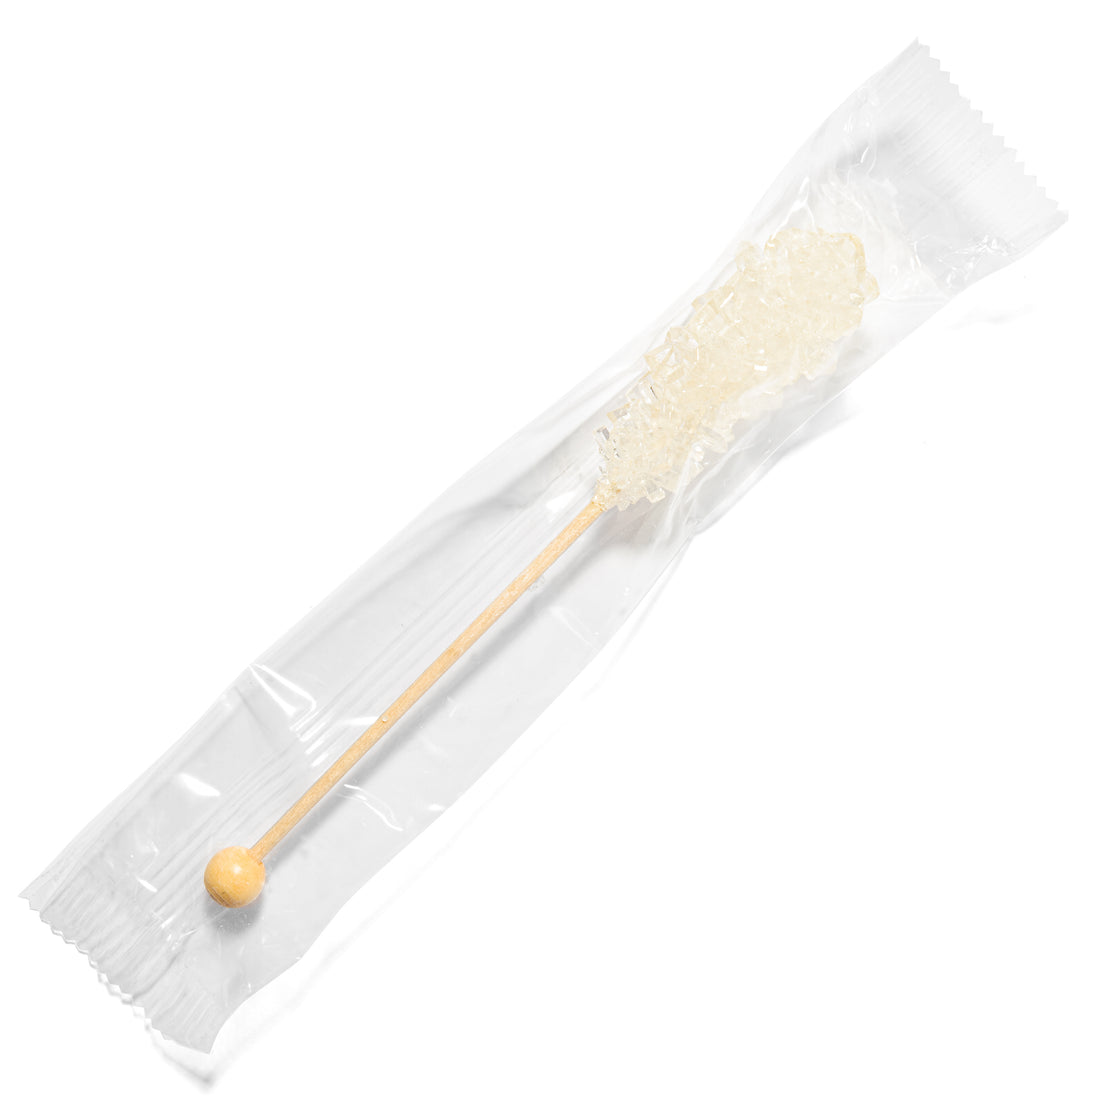 White Cafe Sugar Crystal Stick for Coffee and Tea Sweetener